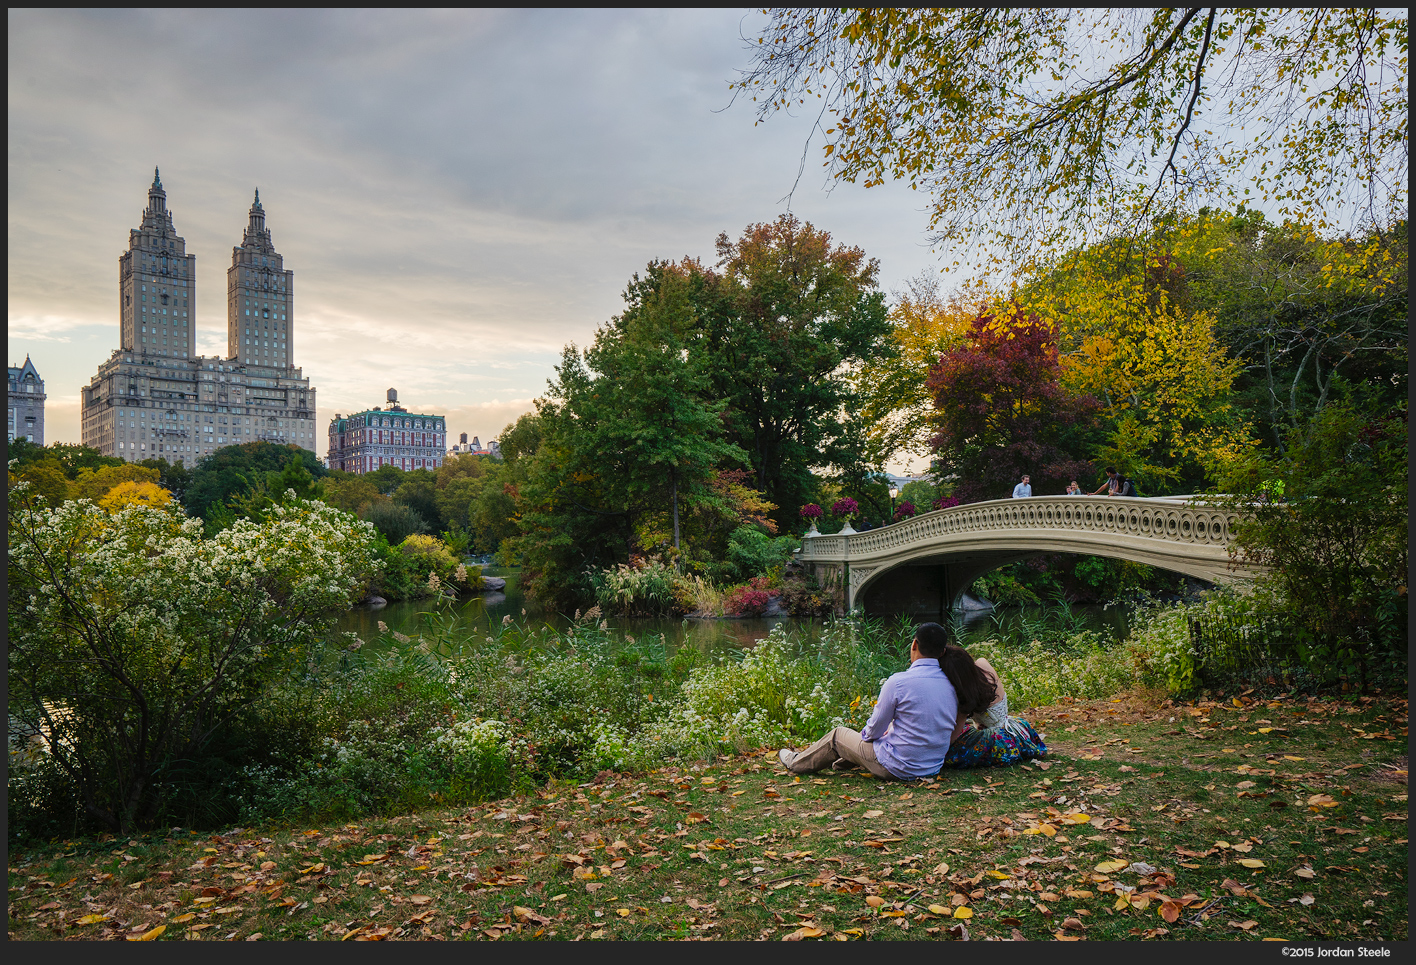 Central Park Lovers - Sony A7 II with Zeiss FE 16-35mm f/4 @